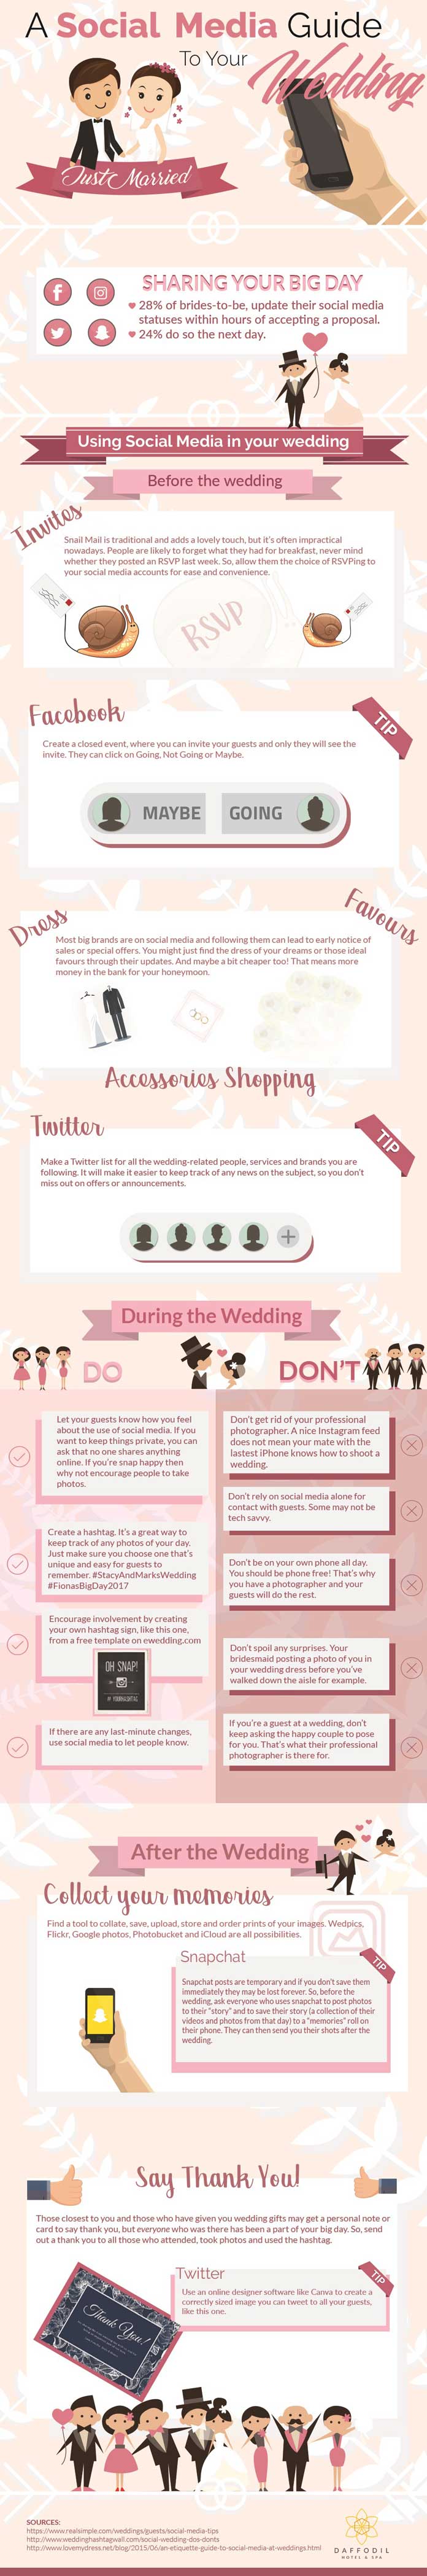 A Social Media Guide to Your Wedding